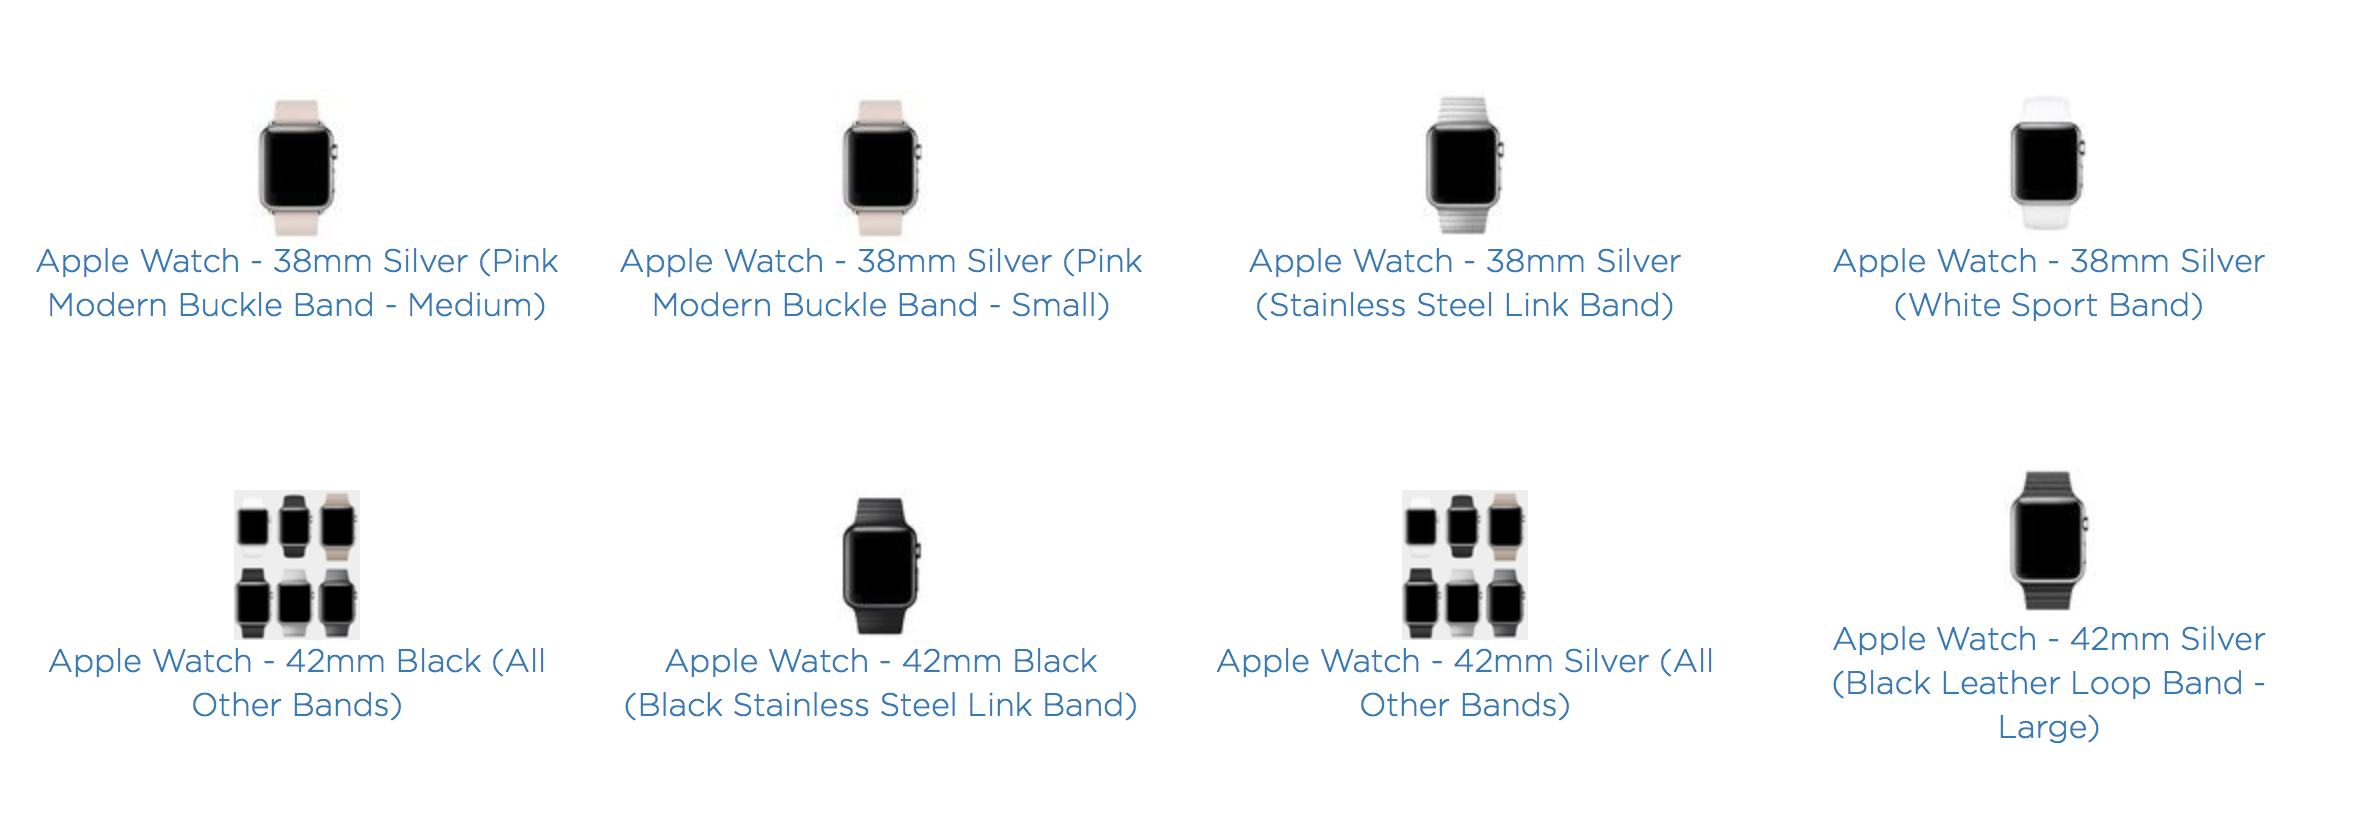 Sell Your Apple Watch Now to Get the Best Price